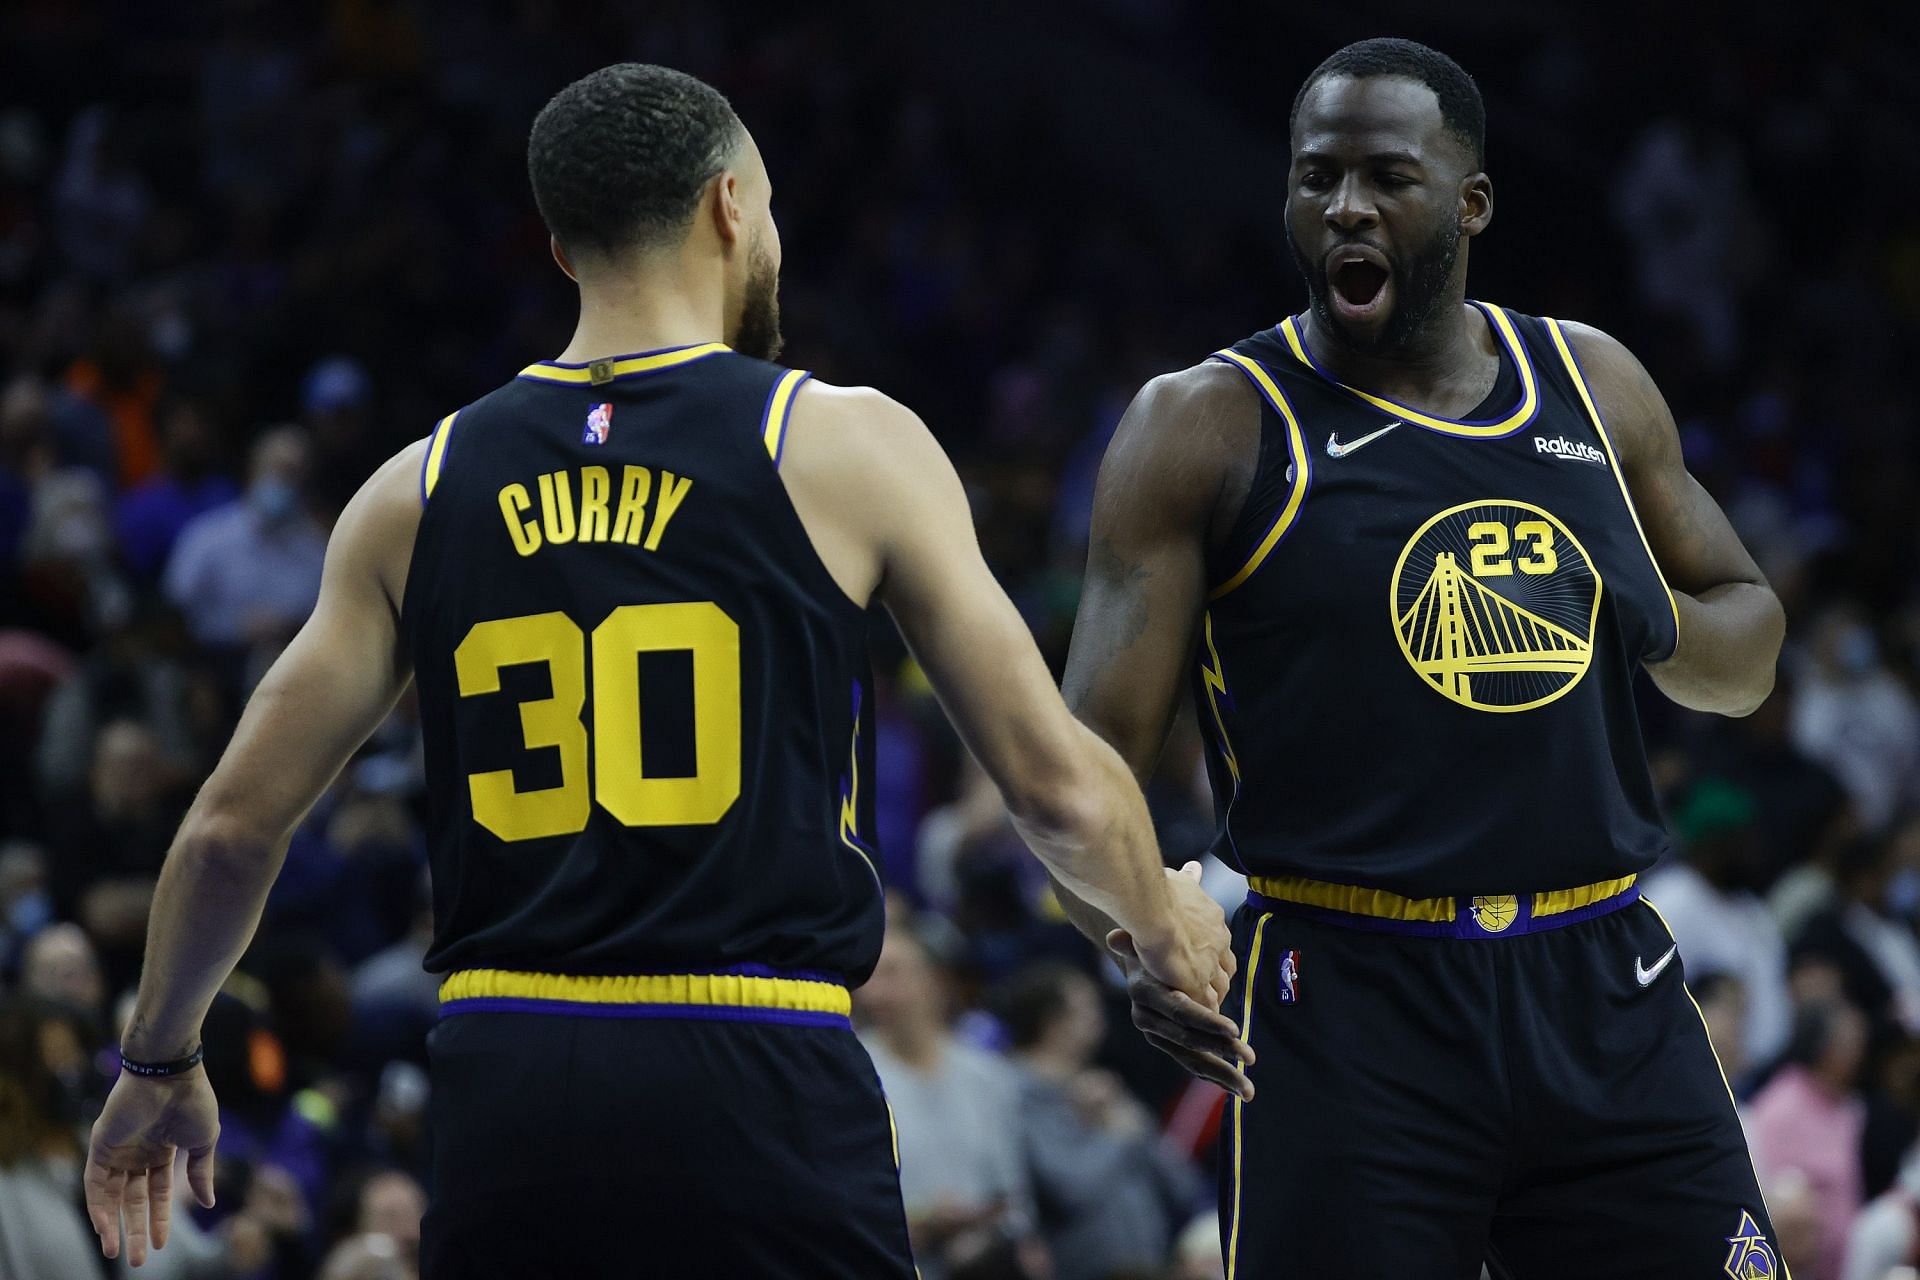 Draymond Green is fairly certain the Golden State Warriors will win three of the next four NBA championships. [Photo: Bleacher Report]